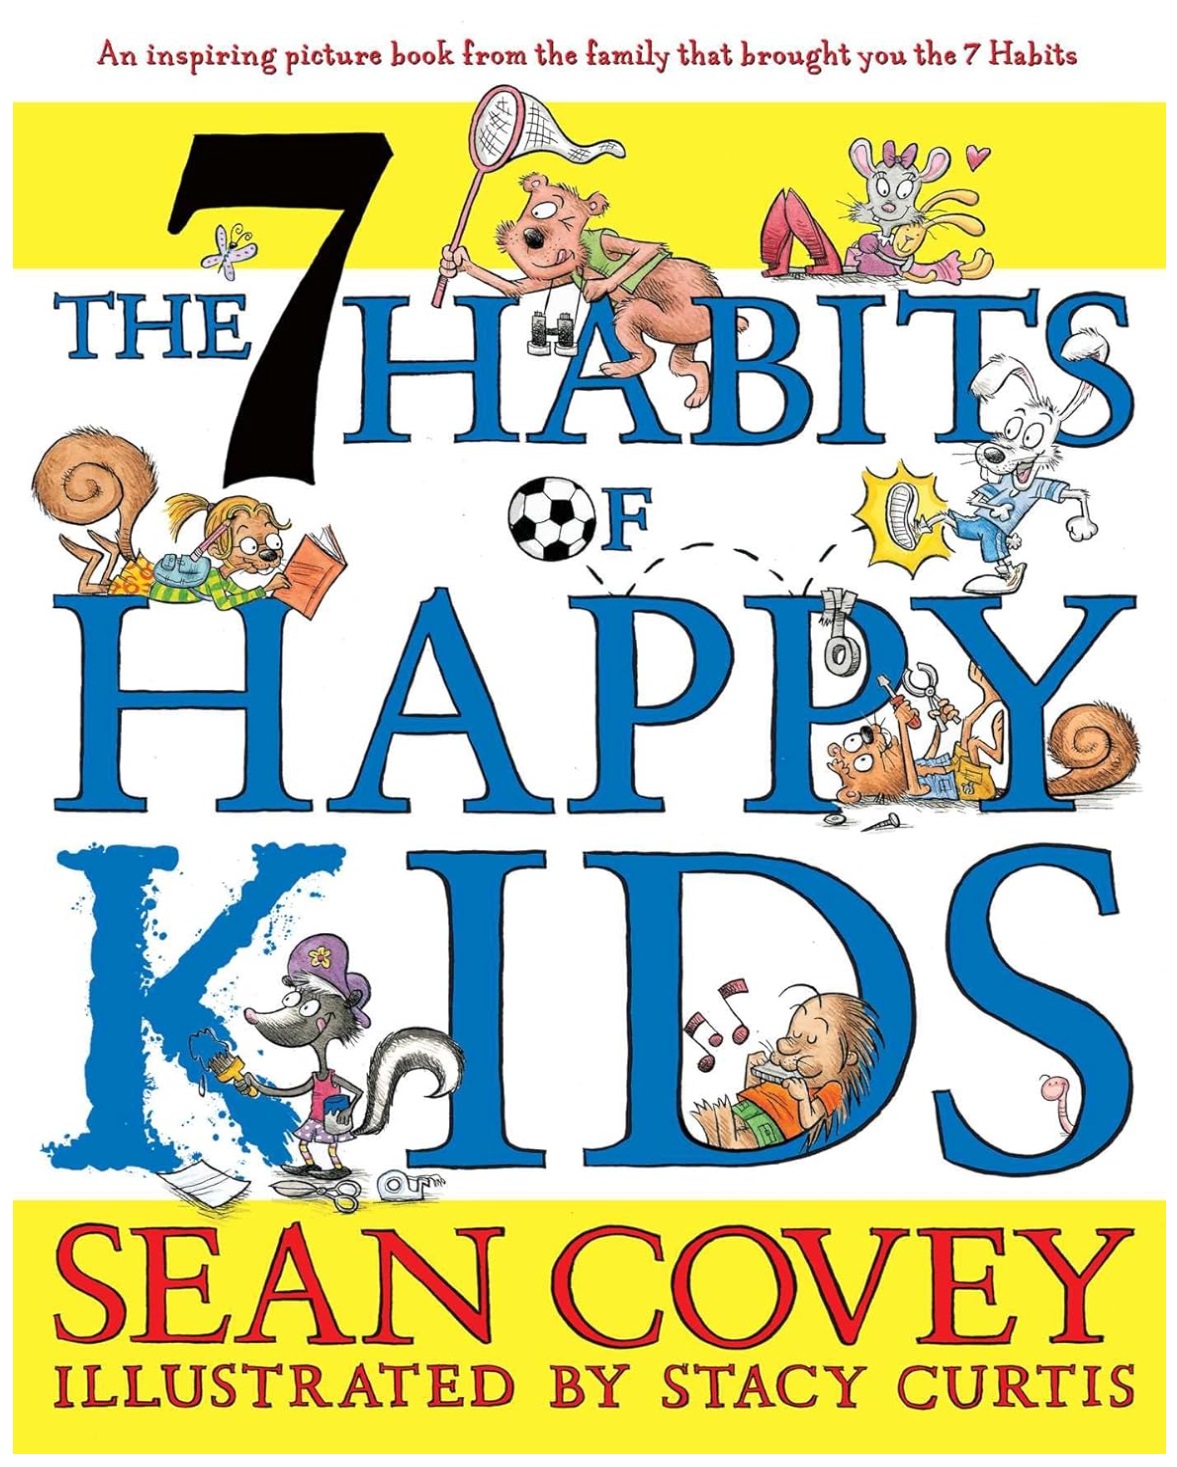 The 7 Habits of Happy Kids by Sean Covey